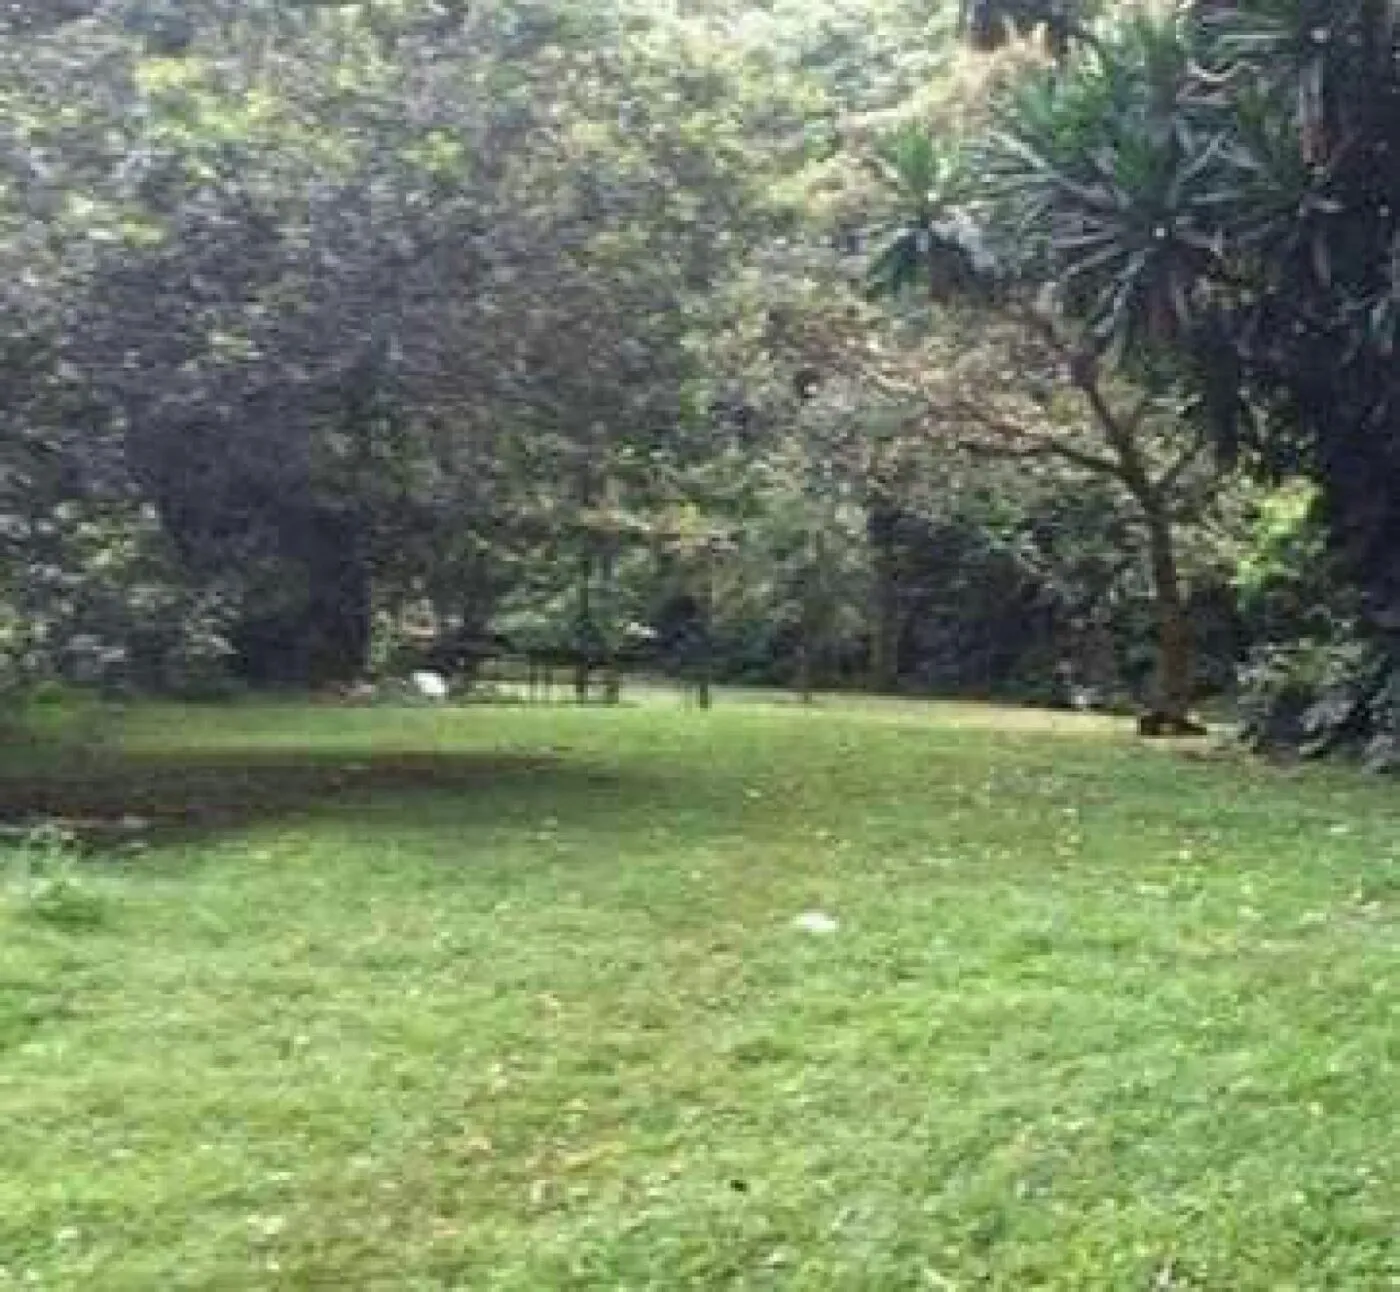 Land For Sale Real Estate-Land for sale in Karen Hardy 1/2 Acre @30M Ready Title Deed QUICK SALE Exclusive half acre 0.5🔥 11